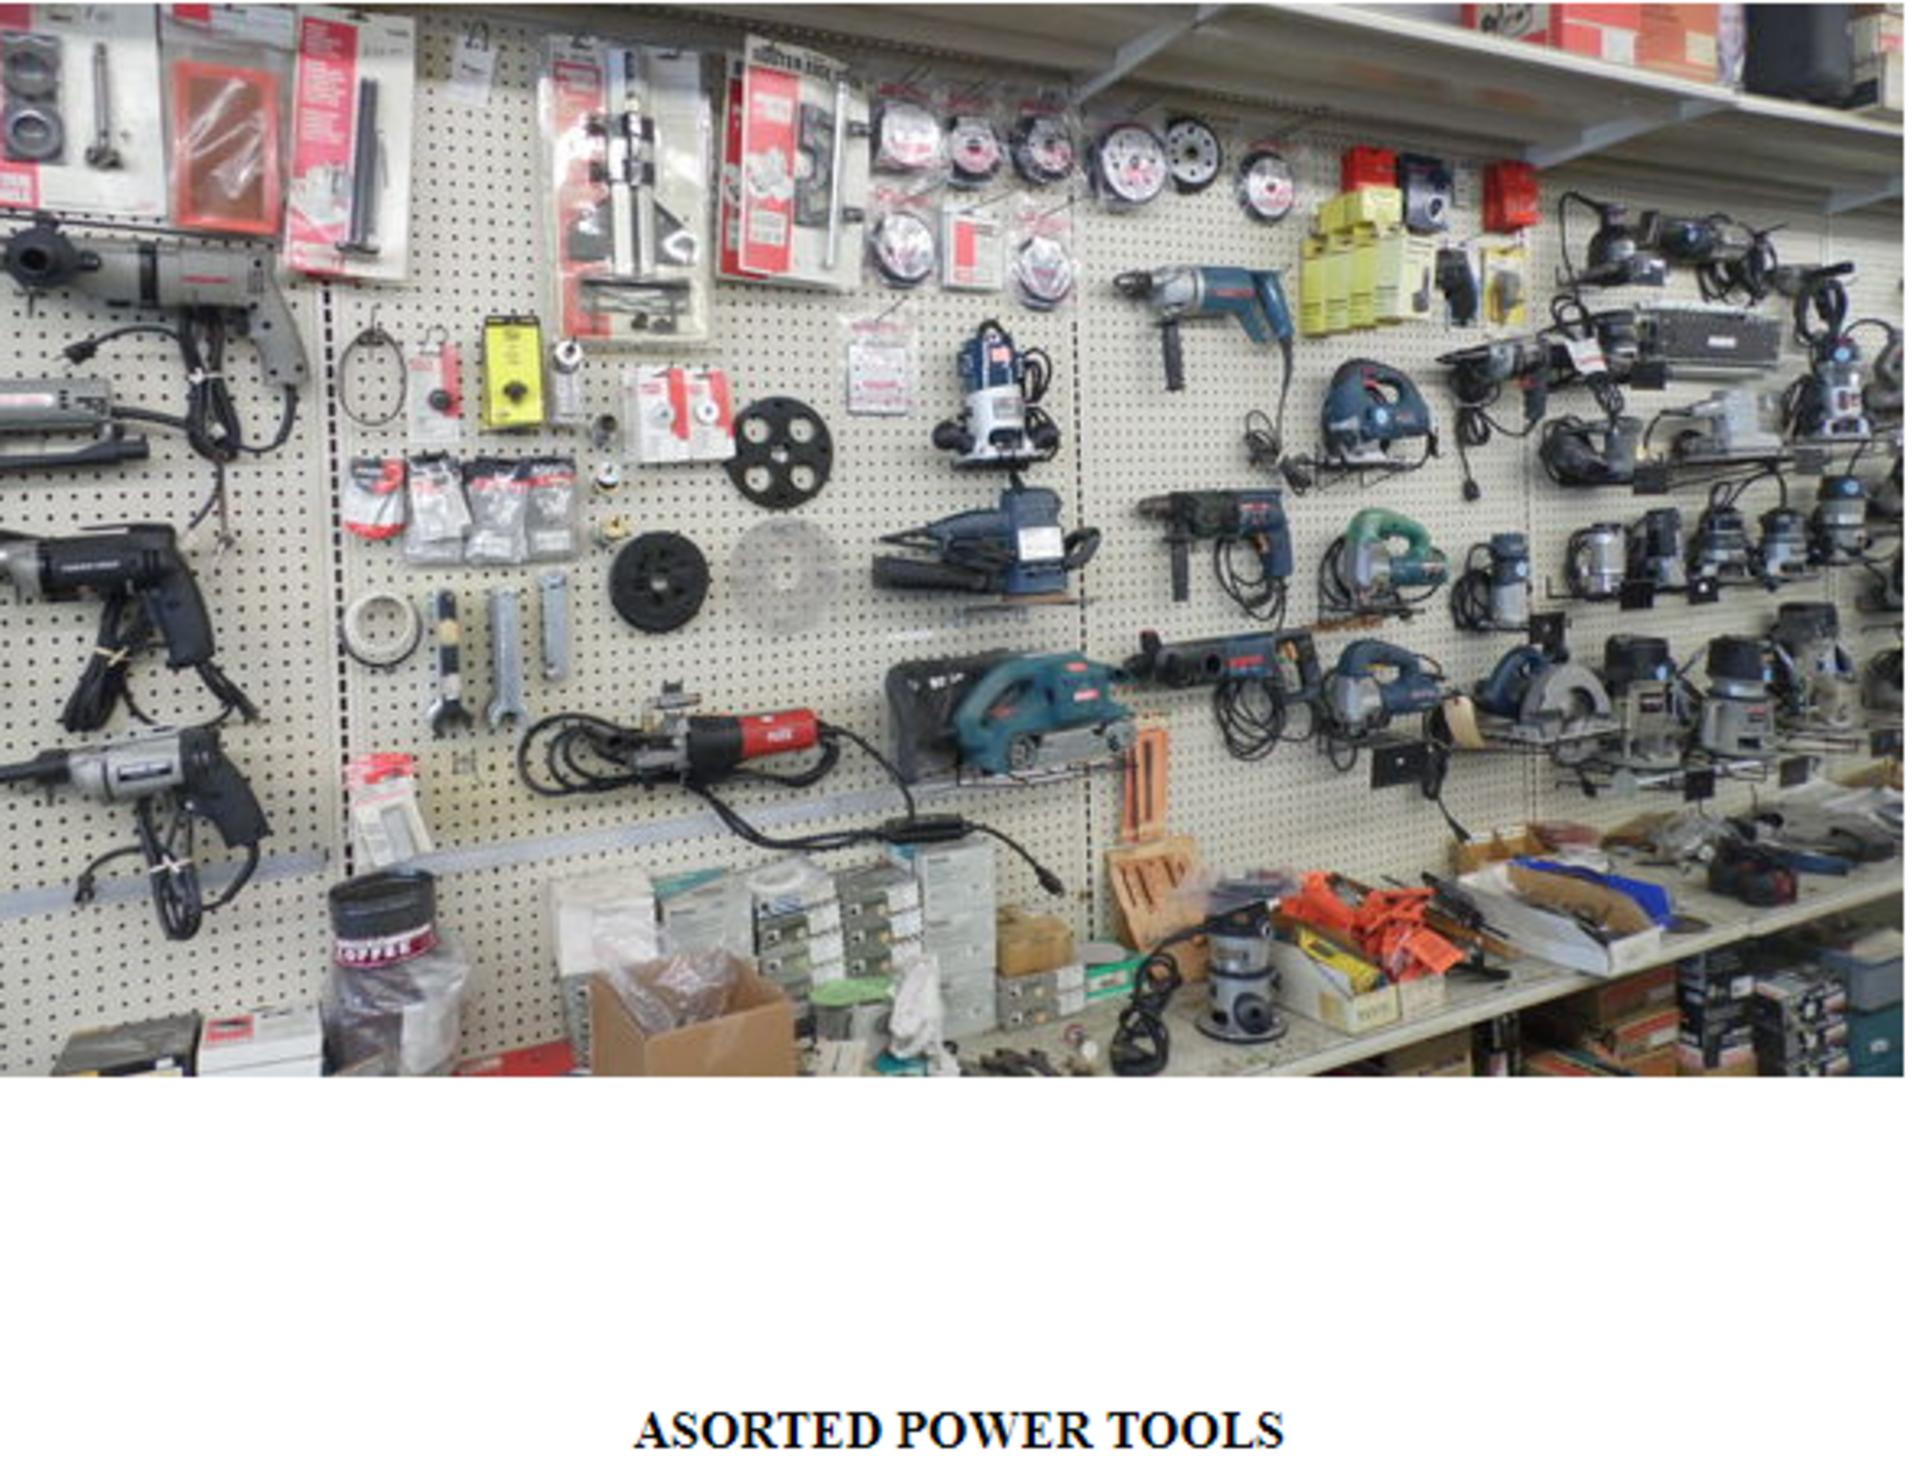 Catalog Coming! Tool Store Auction - Retiring after 38 years - Nice Assortment of Tools! - Image 3 of 5